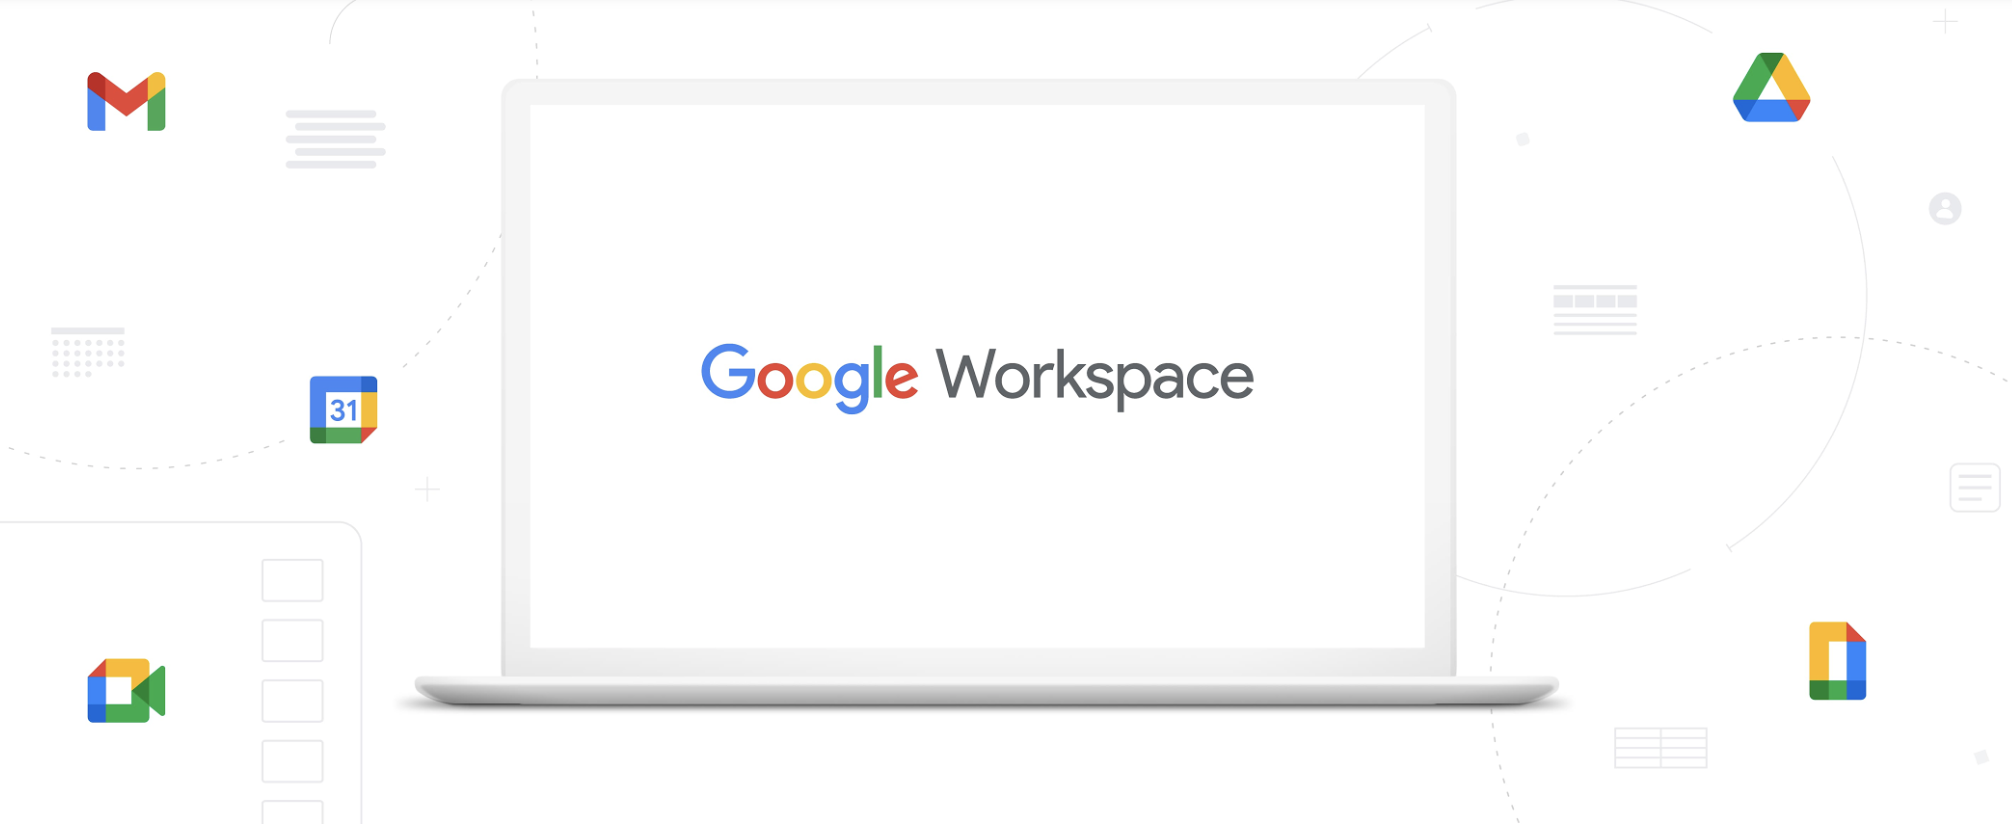 Google Workspace Elevates Collaboration by Focusing on the Task at Hand